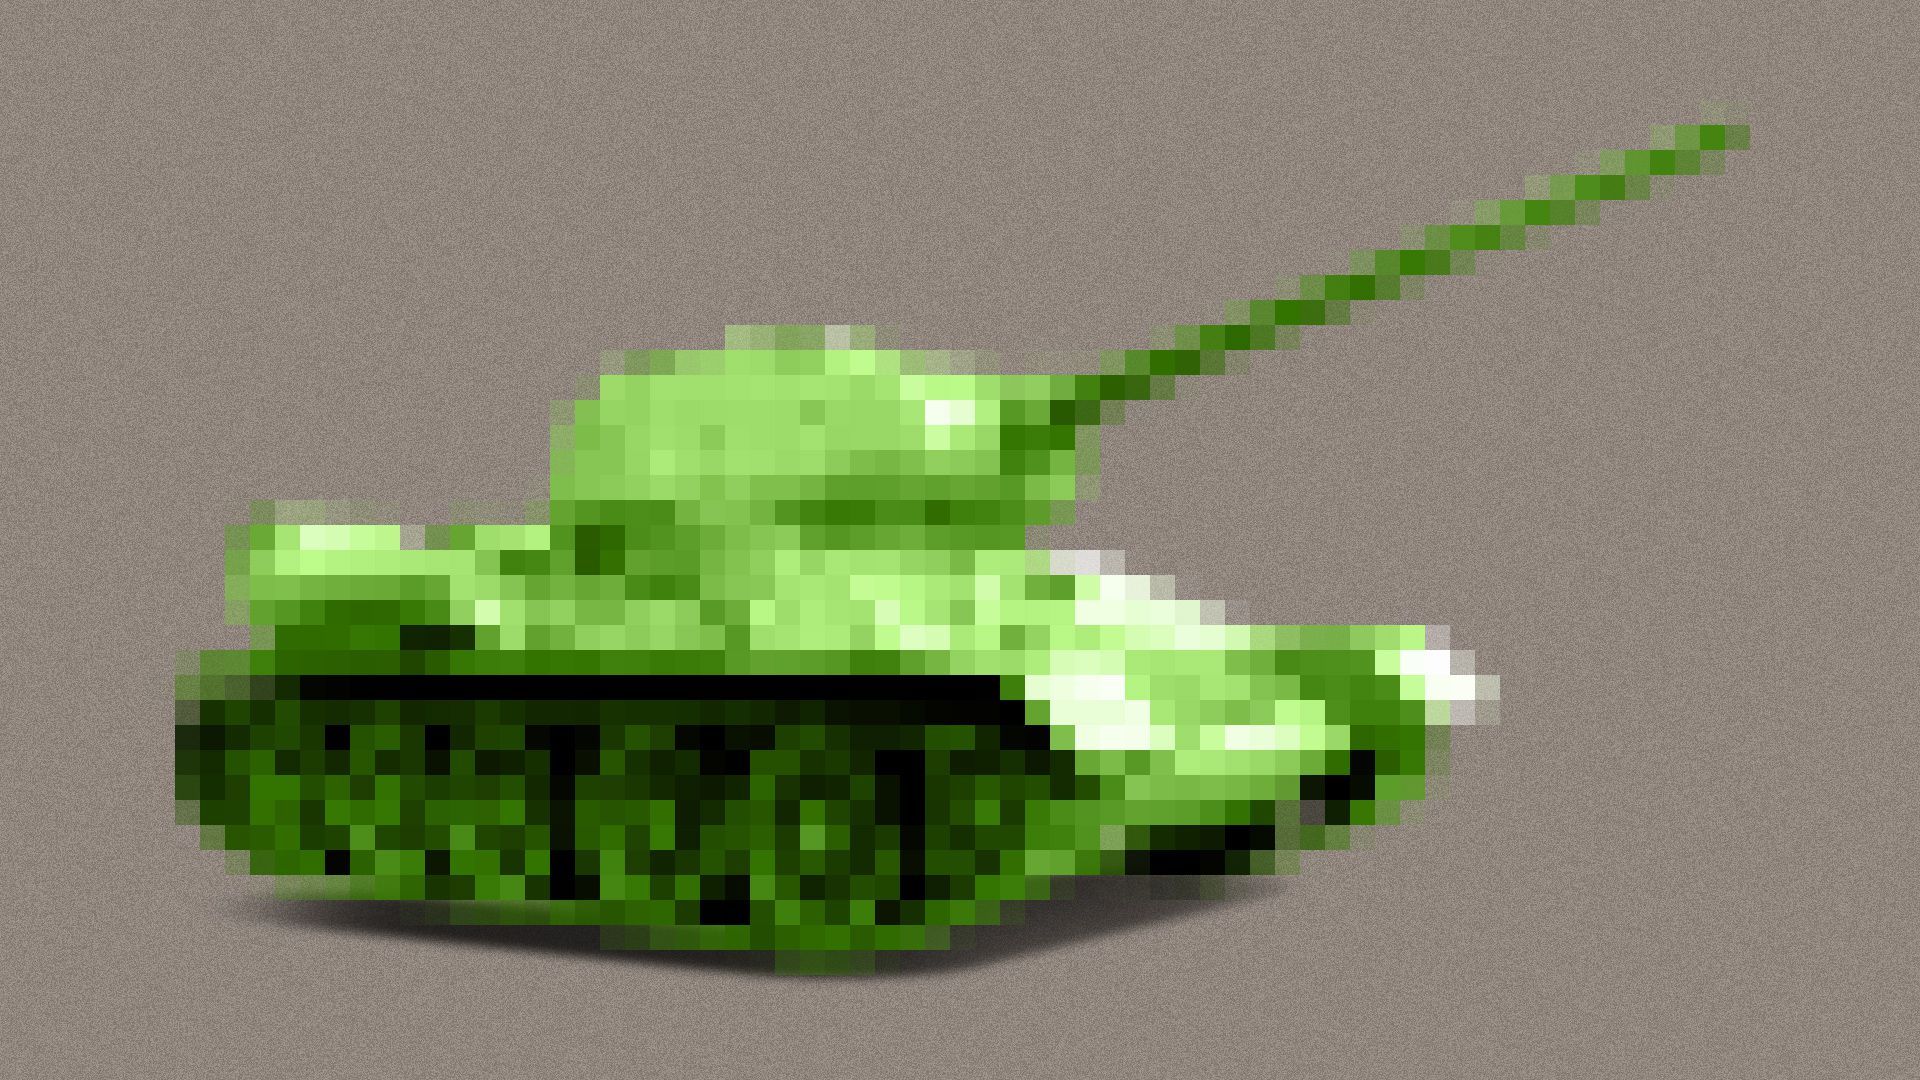 Illustration of a pixelated tank.